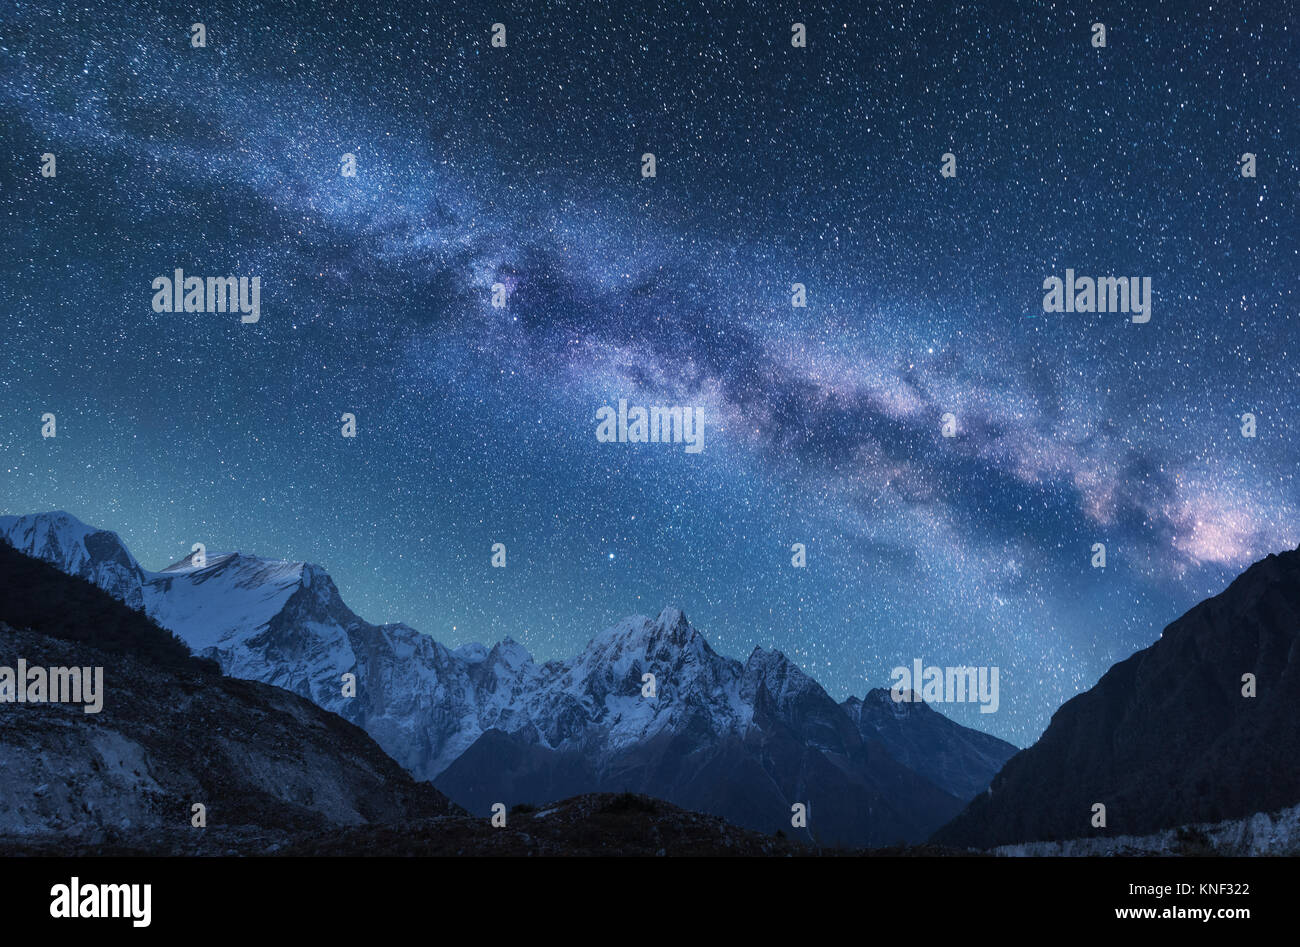 Milky Way and mountains. Amazing scene with himalayan mountains and starry sky at night in Nepal. Rocks with snowy peak and sky with stars. Beautiful  Stock Photo